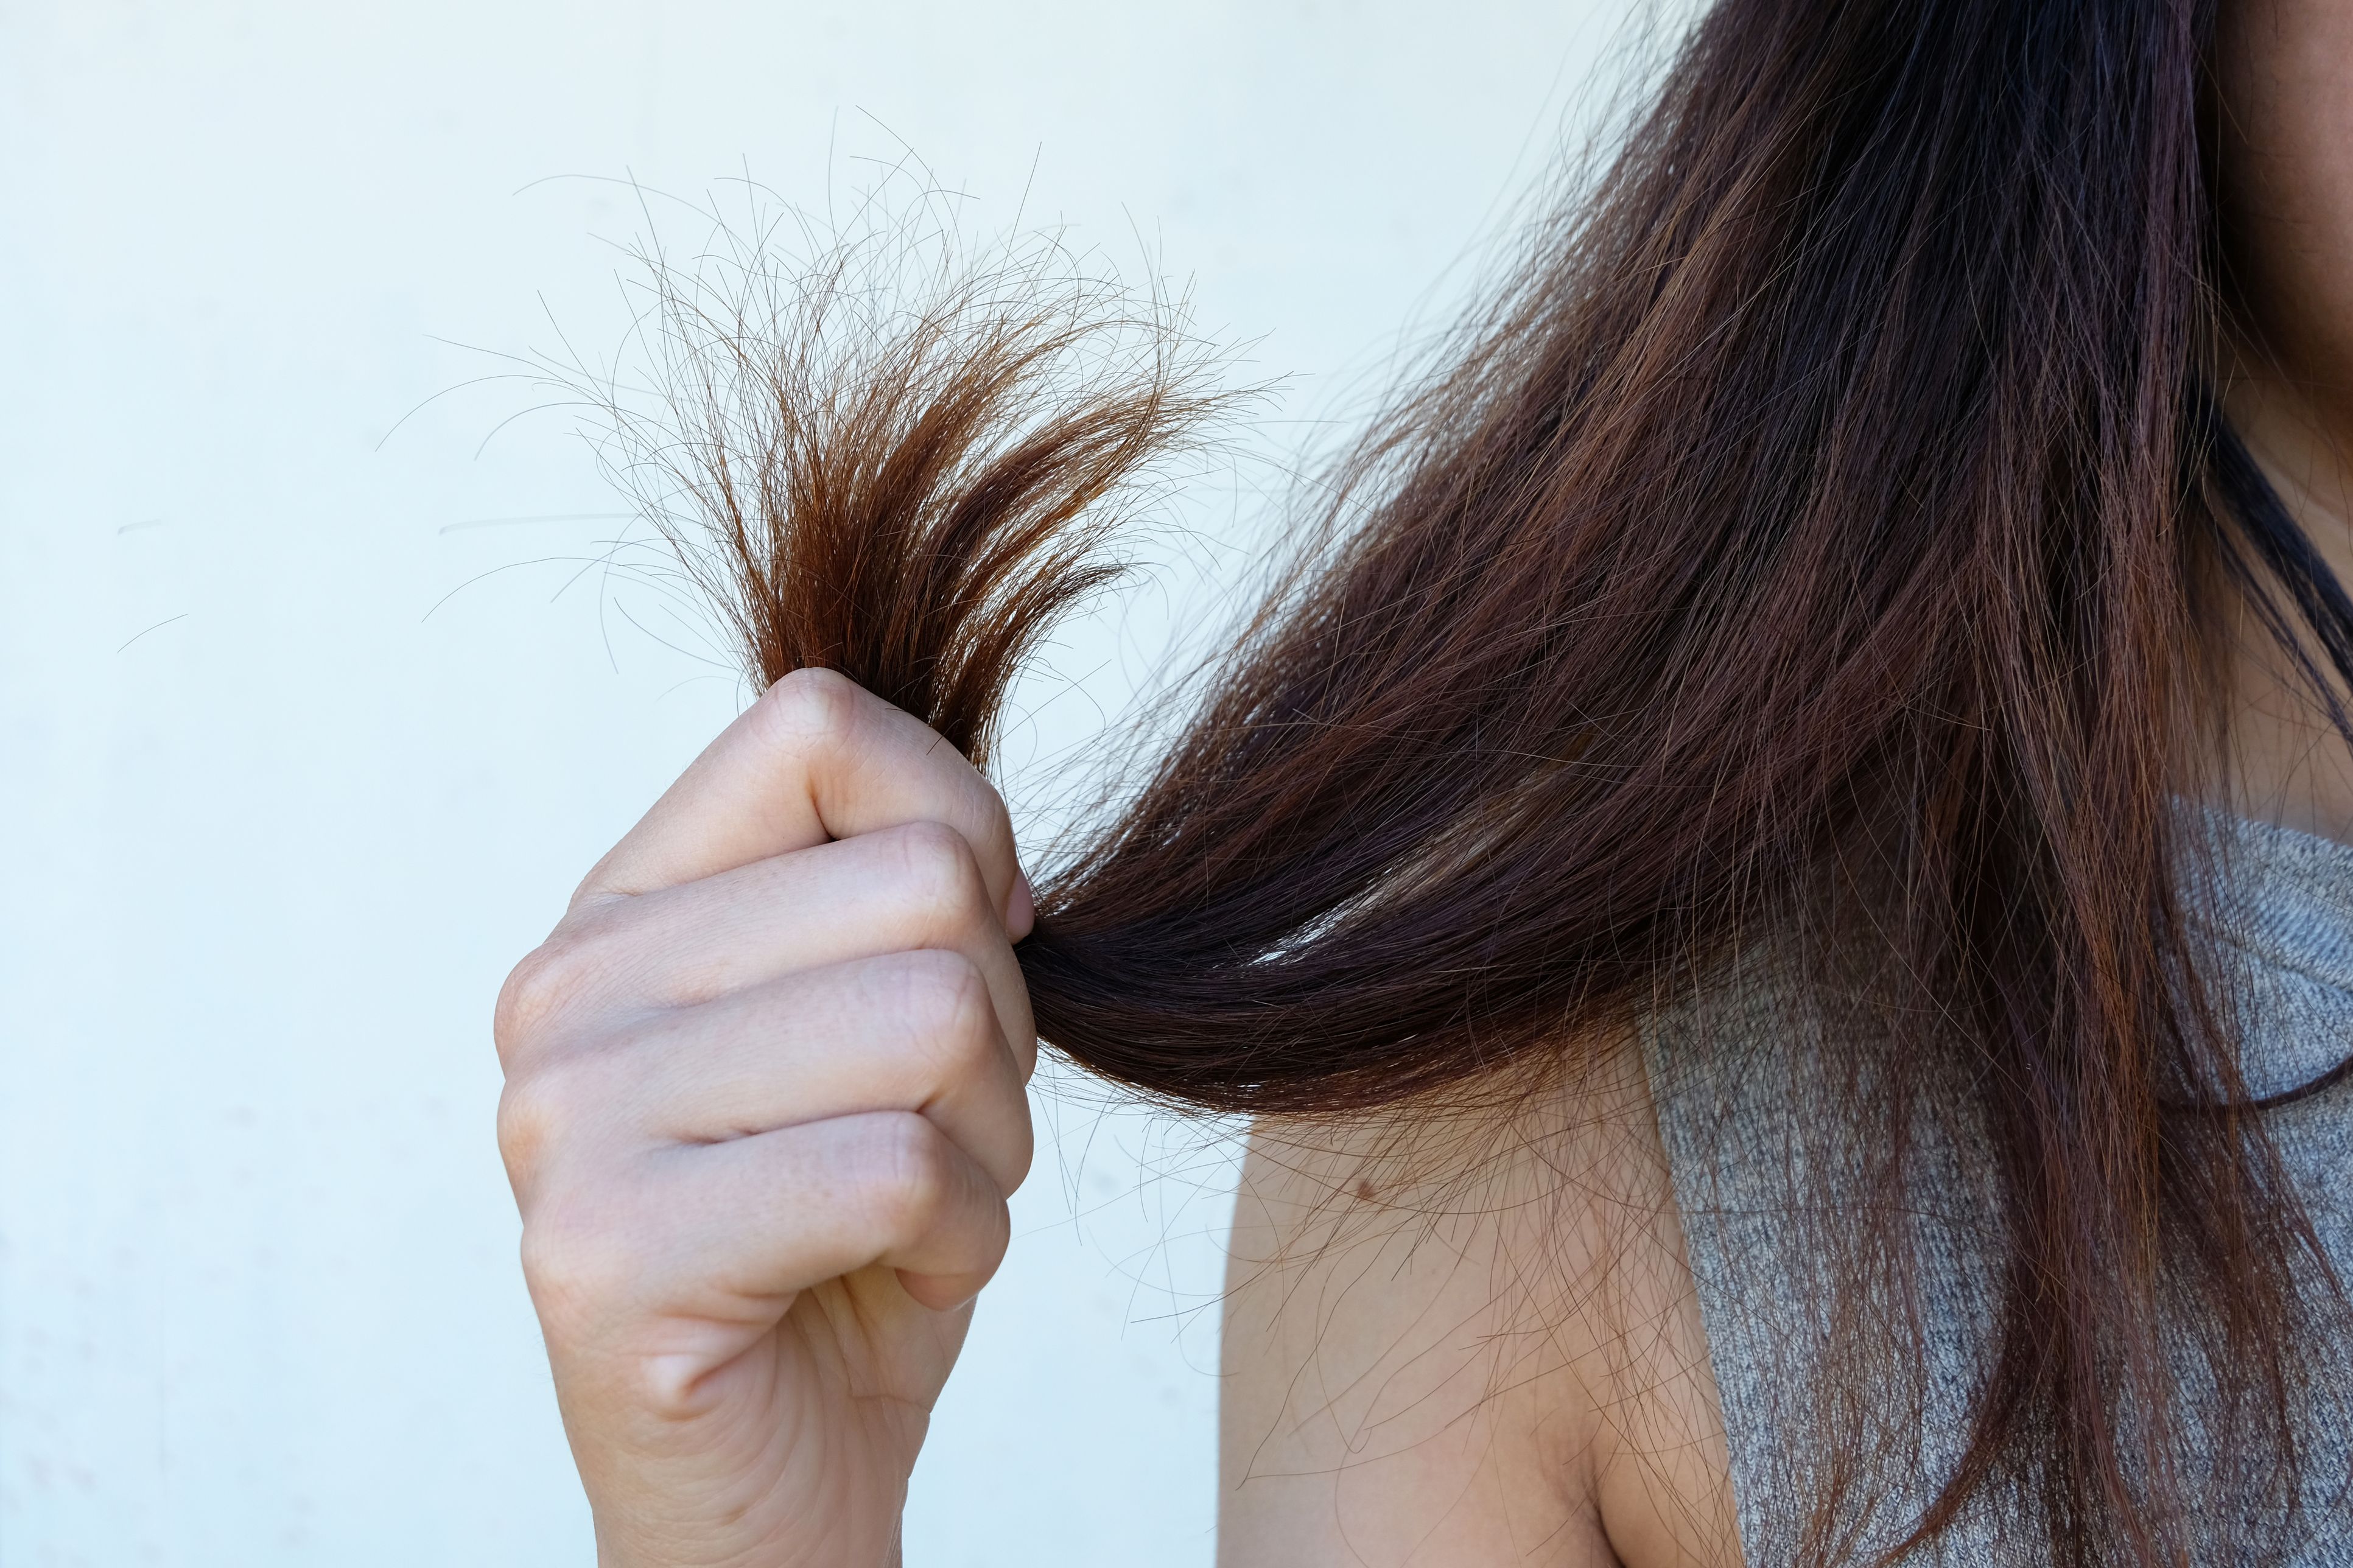 These 3 Best Tips For Dry Hair From Reddit Are Genius | Glamour UK